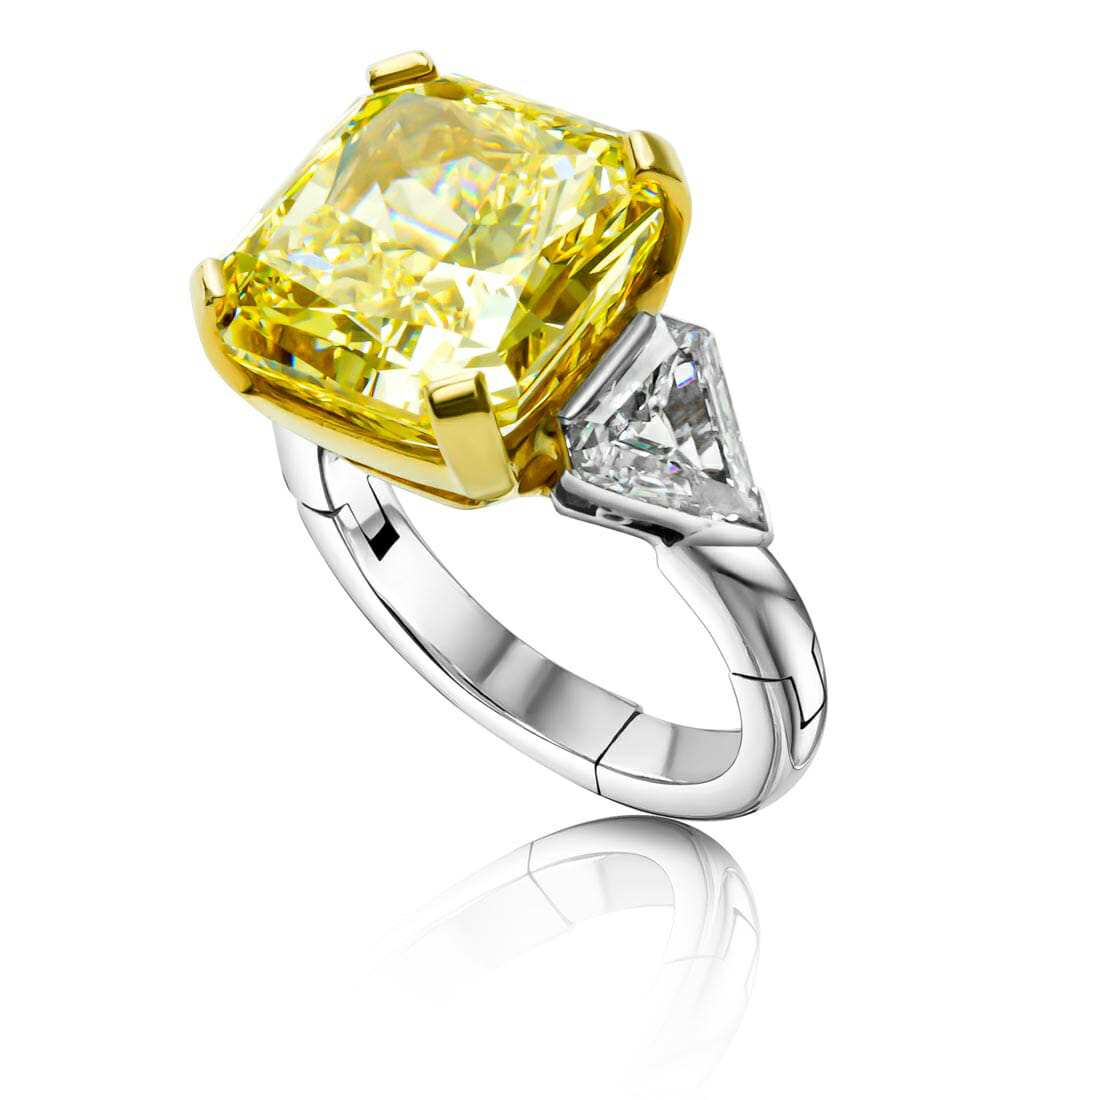 Expert Jewelry Photo Retouching Services for E-commerce $2